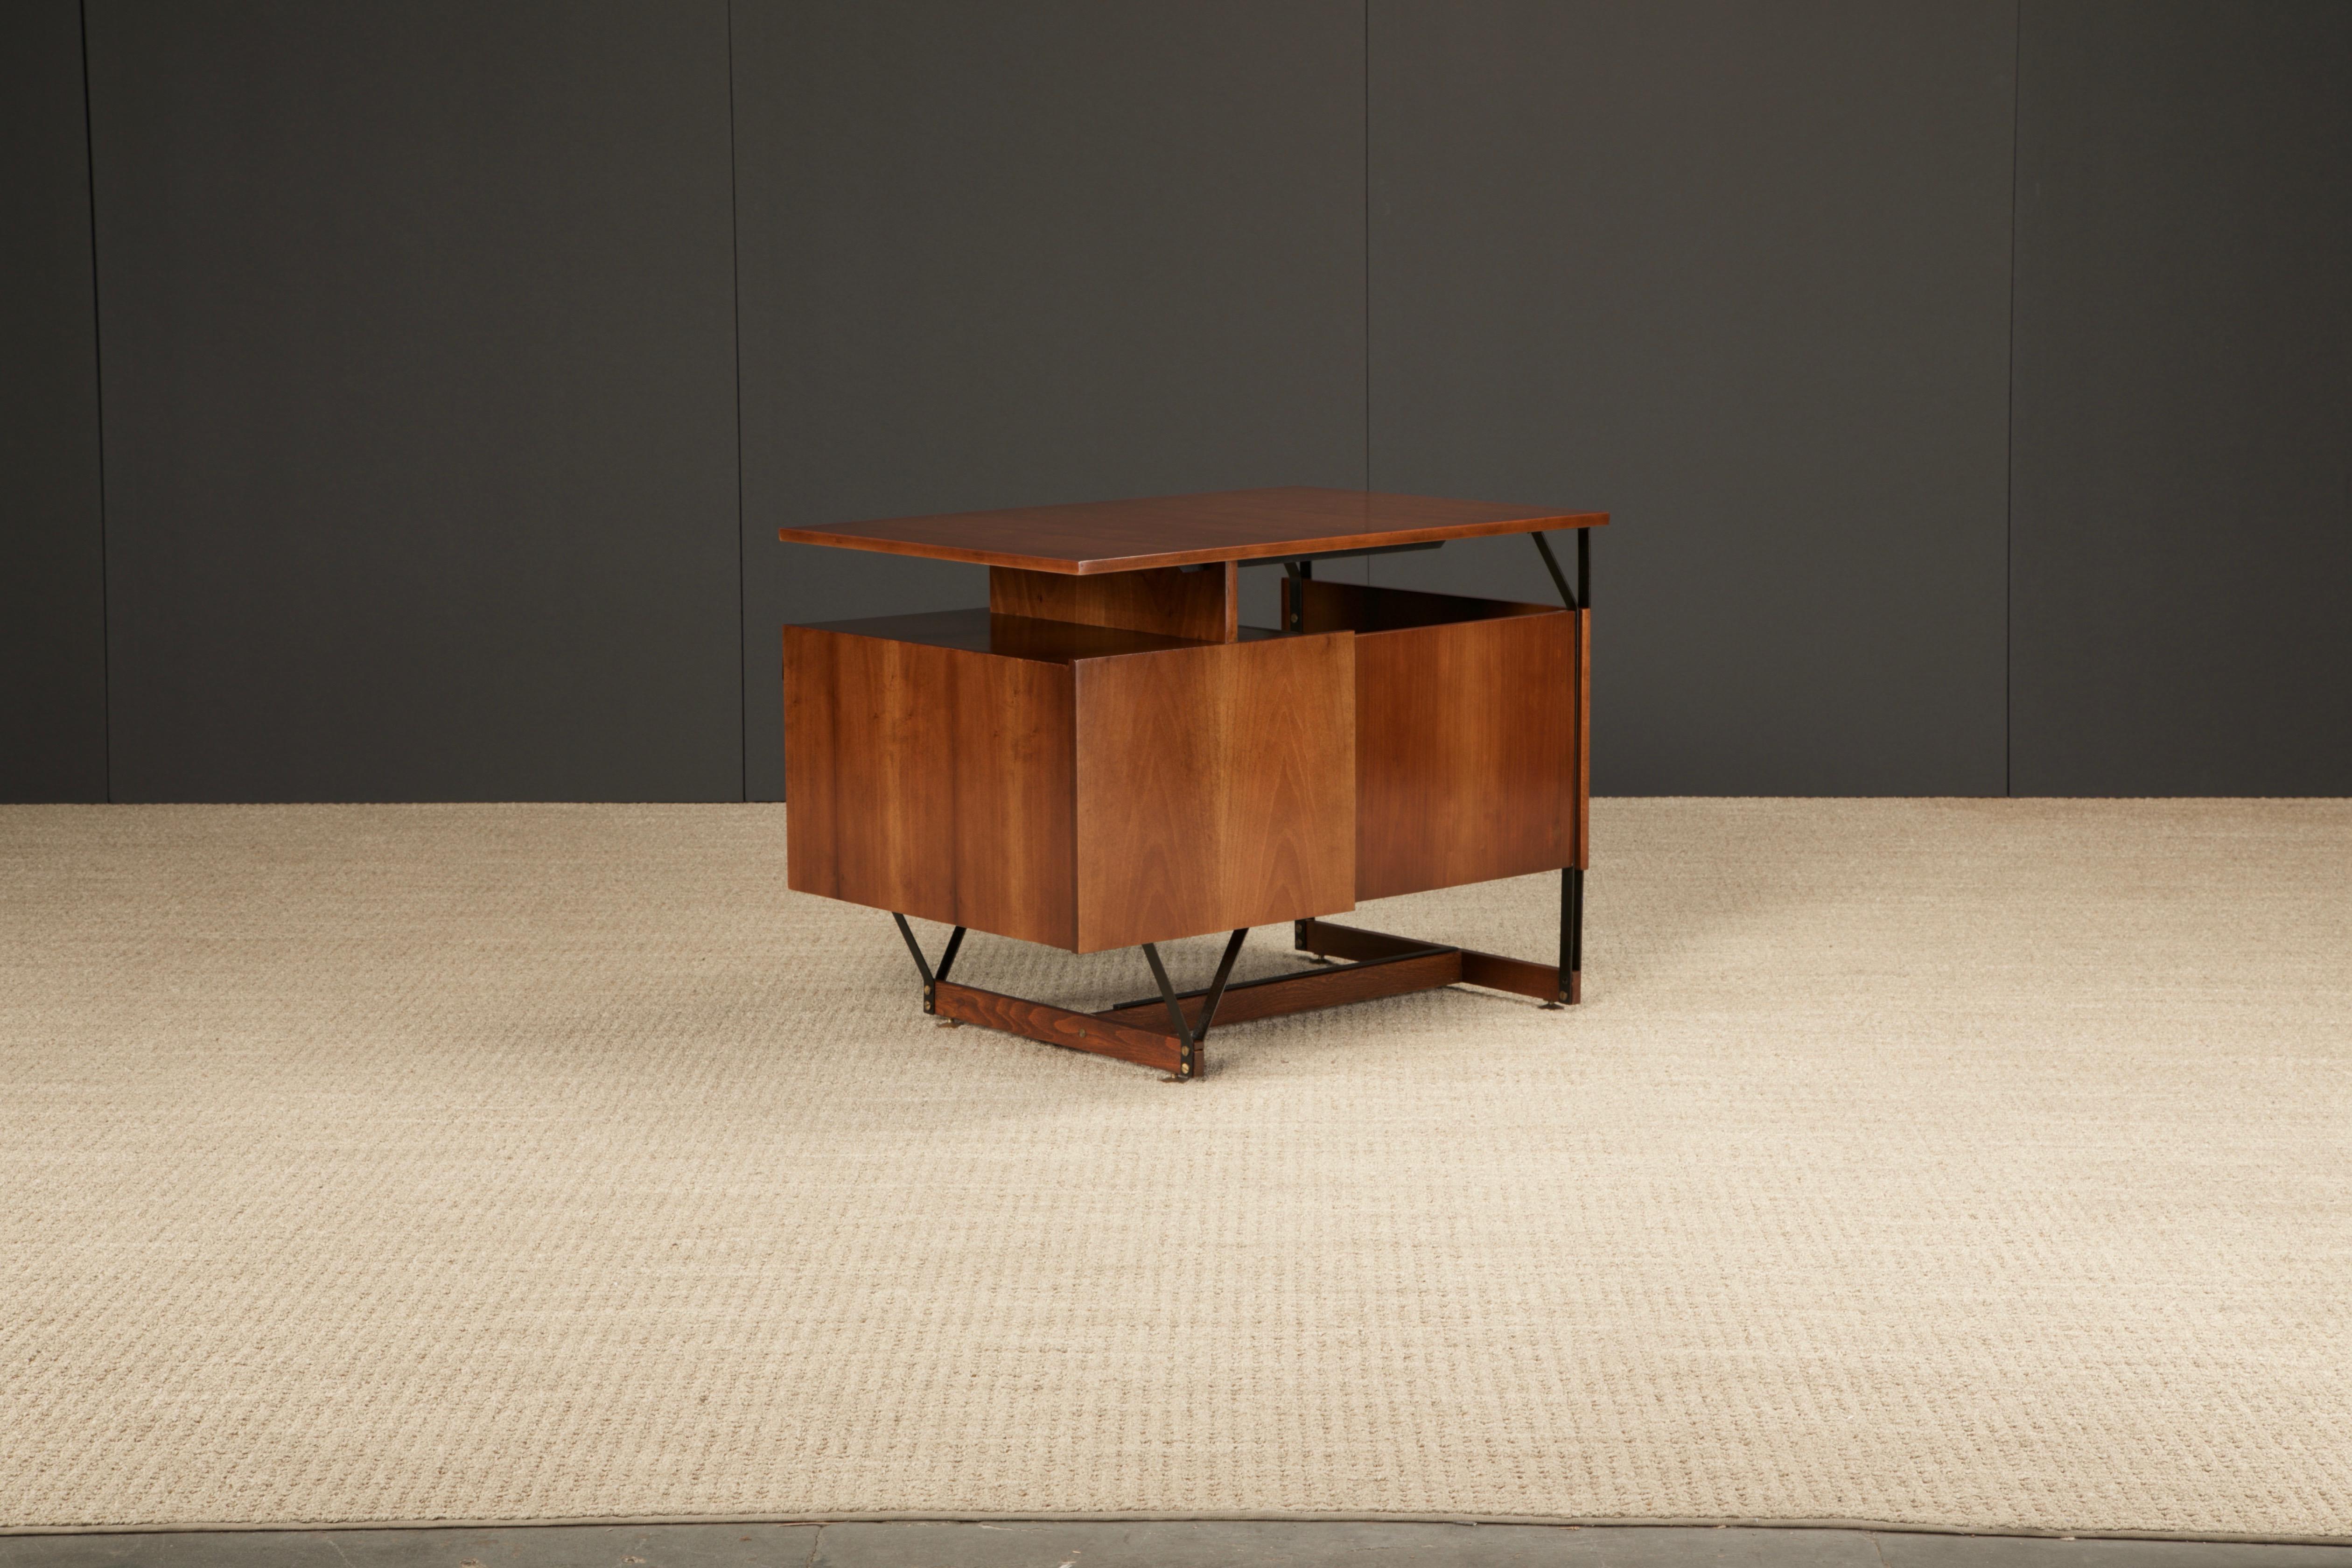 Italian Mid-Century Modern Desk, Style of Gio Ponti, c 1950s, Refinished For Sale 11